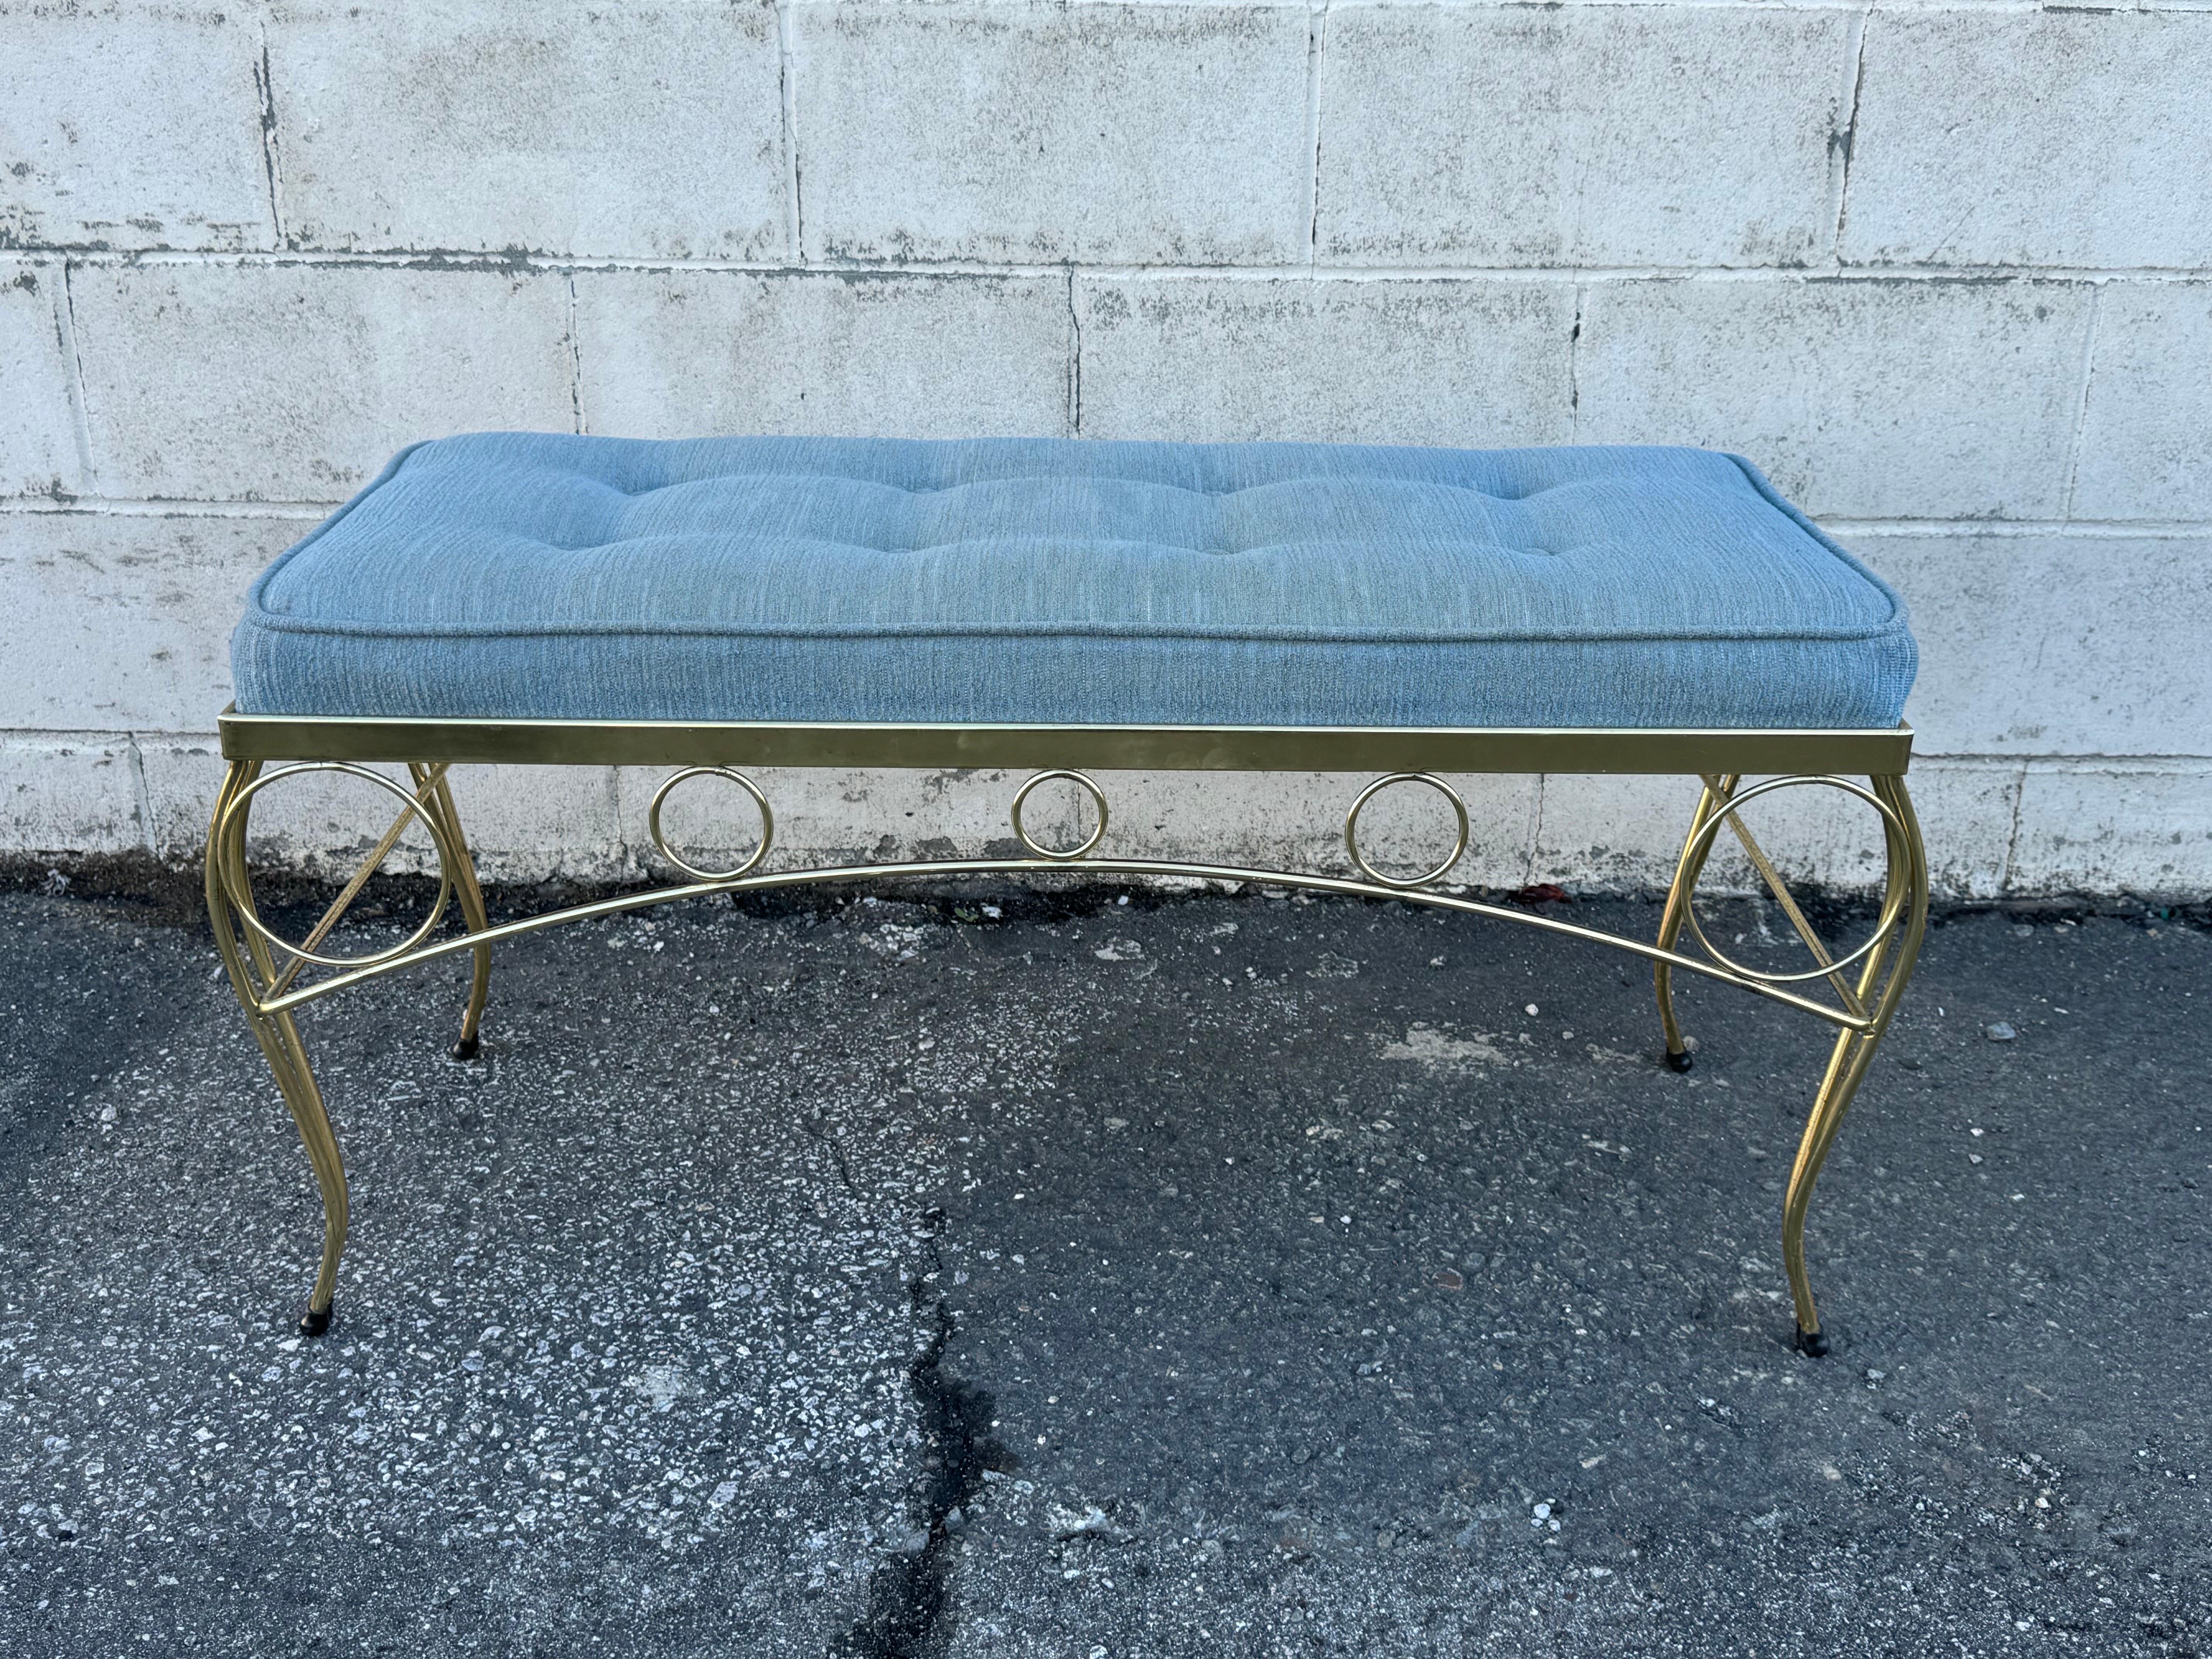 Great vintage, mid century bench after George Koch and Sons furniture. Comes on a strong metal, gilded frame with light blue upholstery.

Both frame and upholstery are in very good structural shape, but both come with age appropriate wear. the gold